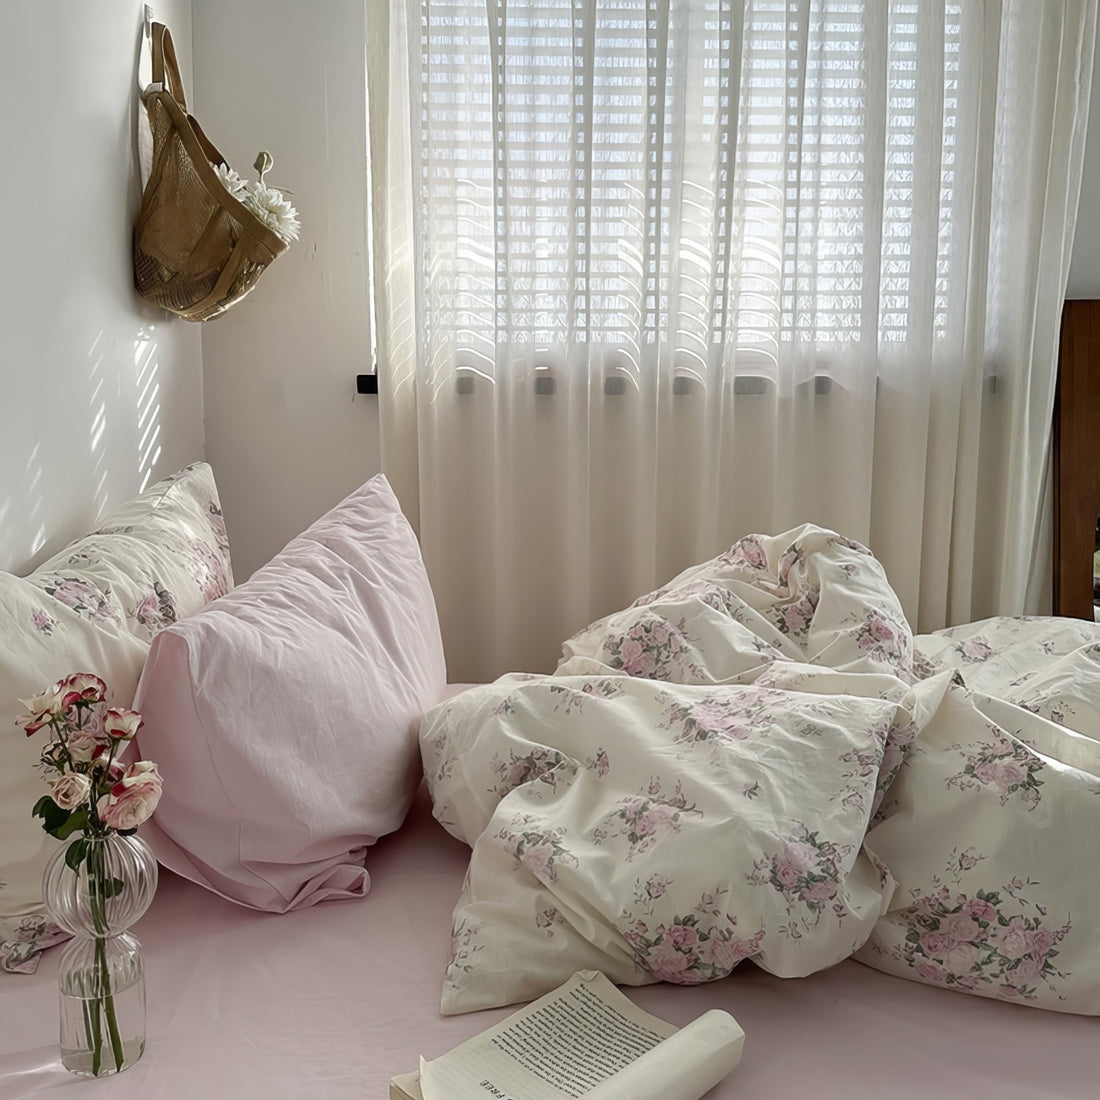 coquette aesthetic blooming pink roses print bedding duvet cover set roomtery